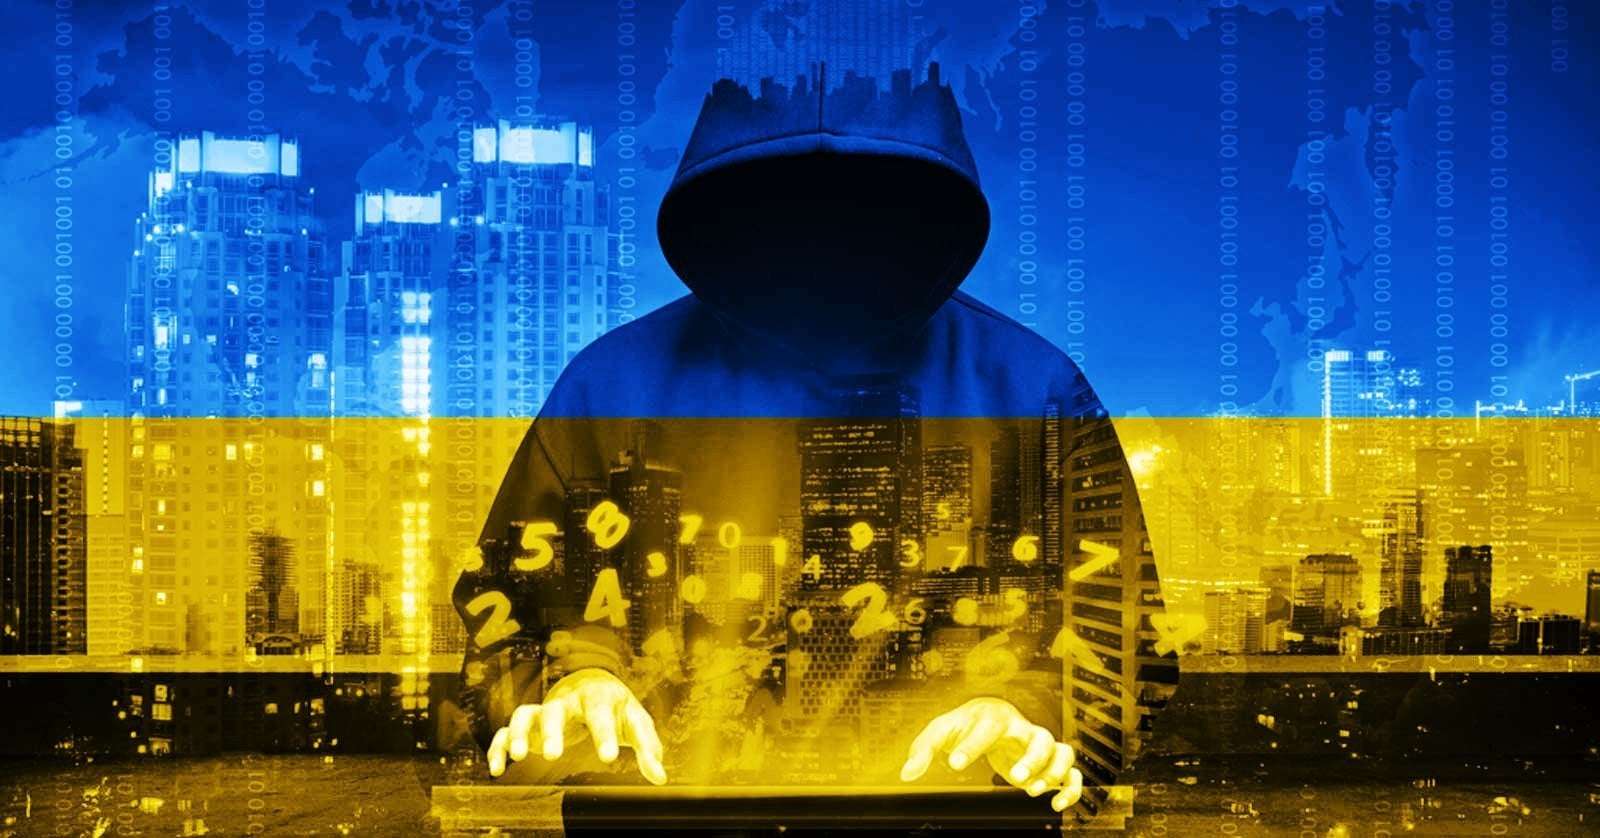 image for Ukraine: Hack wiped 2 petabytes of data from Russian research center